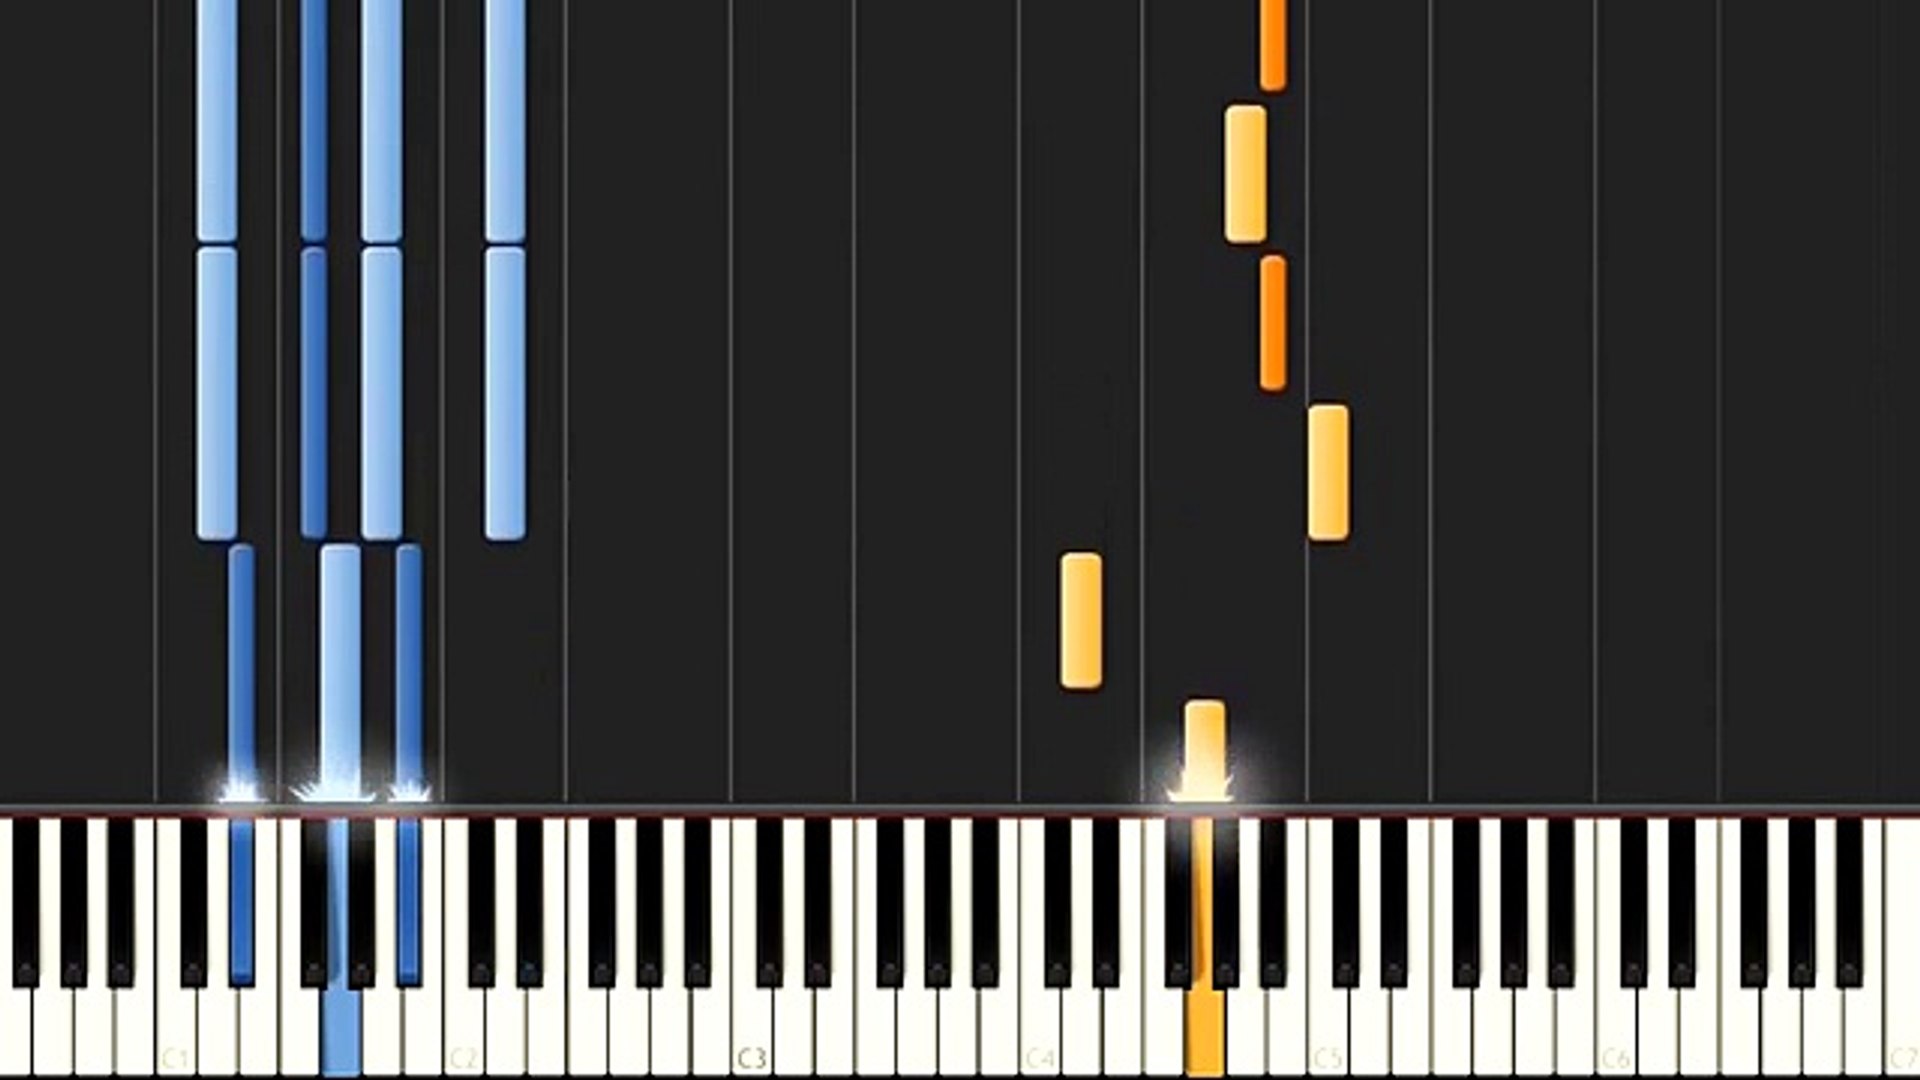 Requiem for a Dream (Piano Tutorial - Synthesia) / Easy Slow - video  Dailymotion